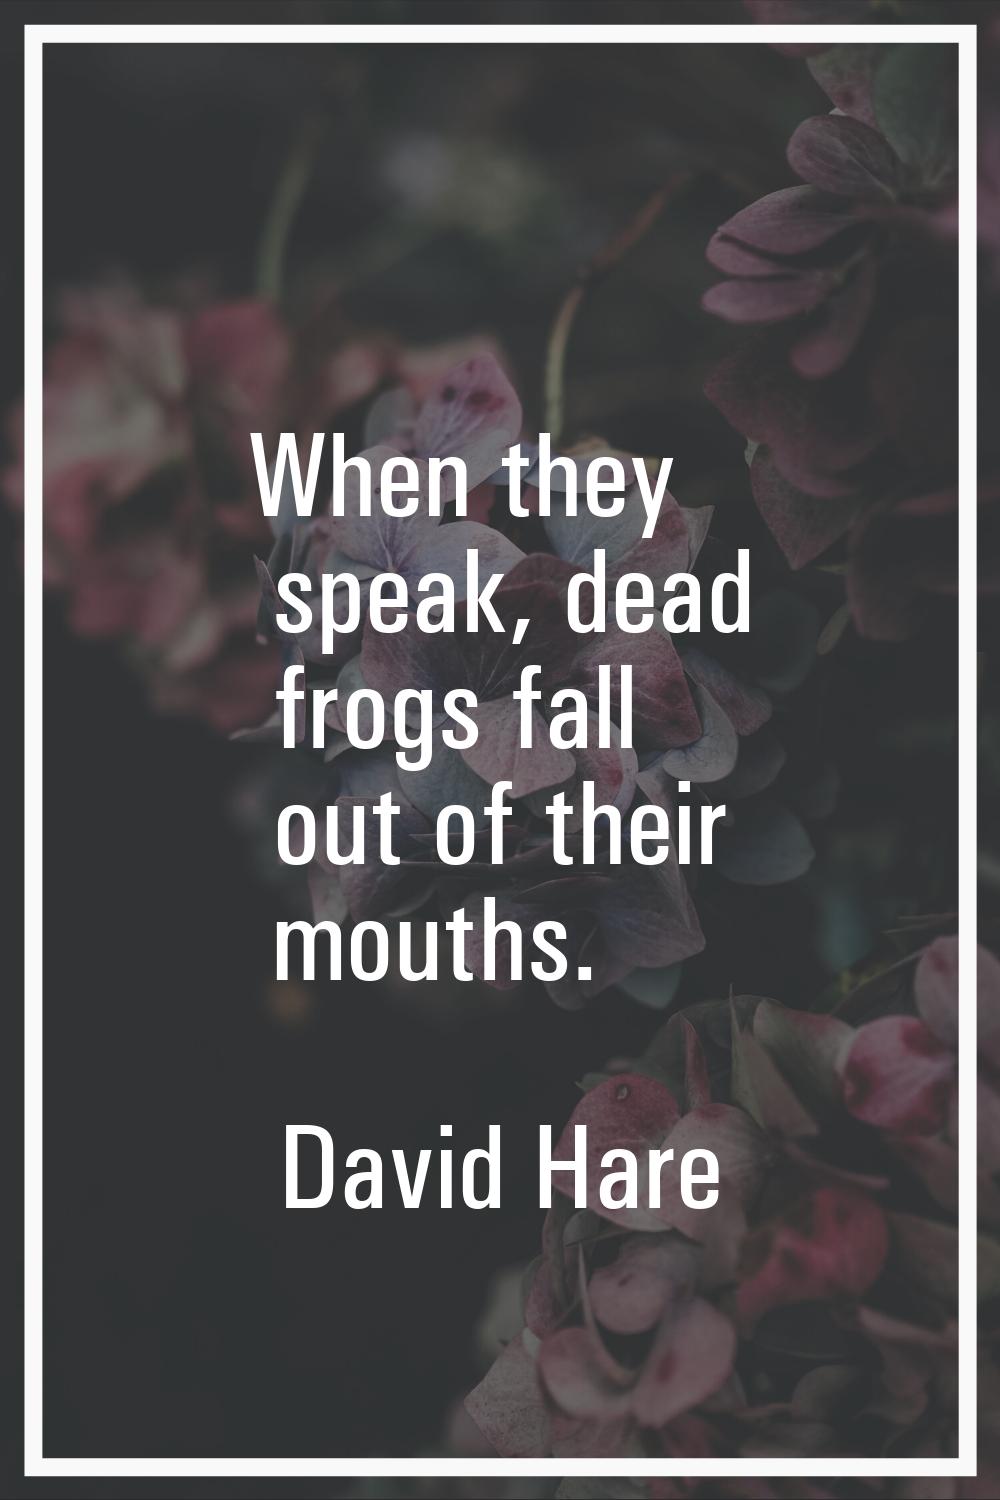 When they speak, dead frogs fall out of their mouths.